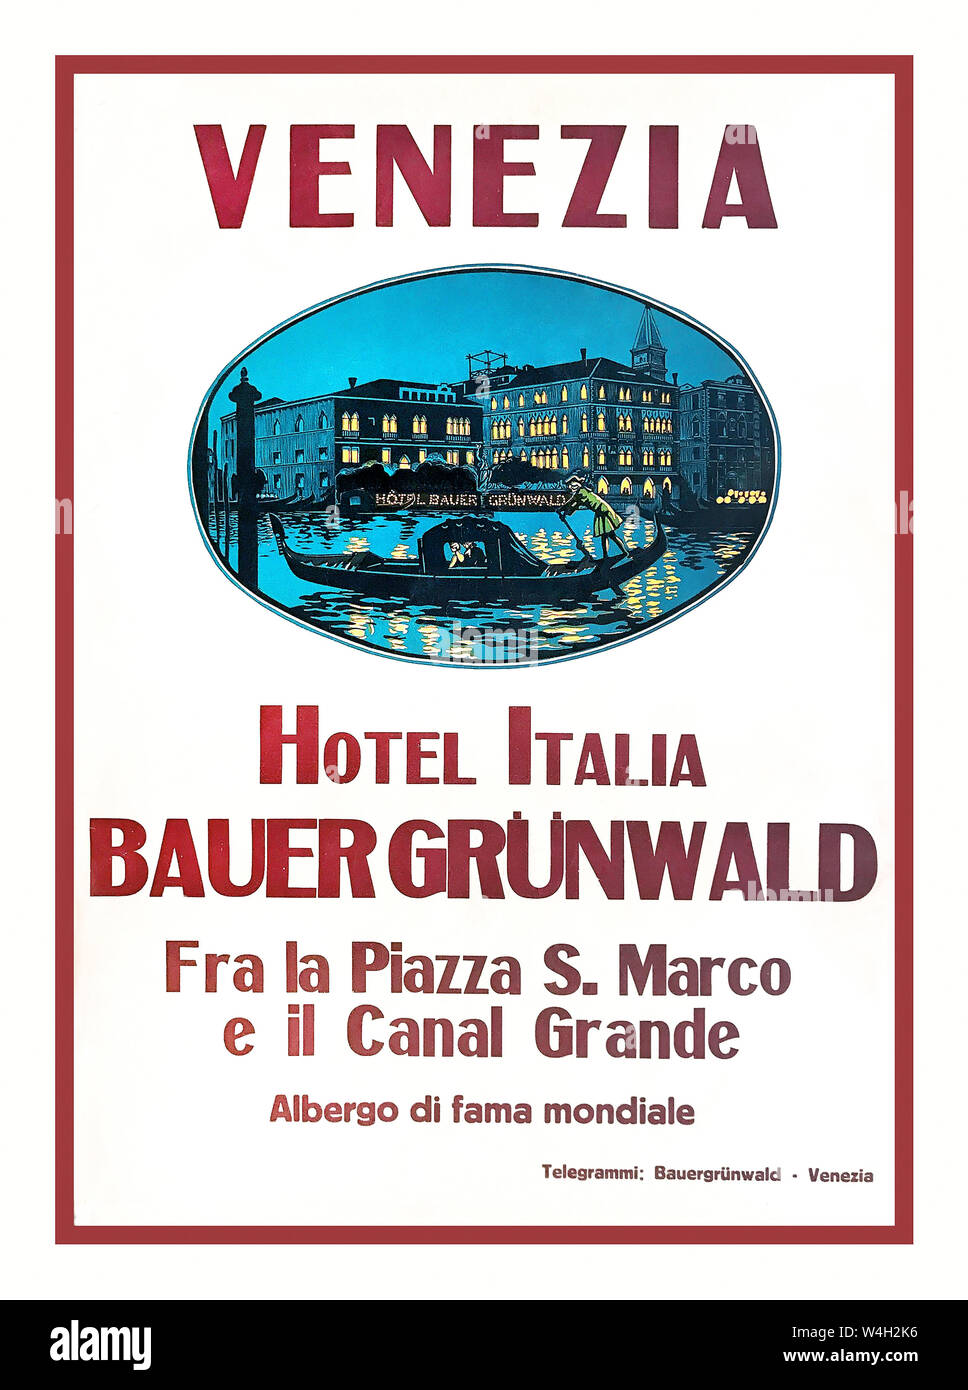 Vintage Travel Poster Venice Hotel 1940's VENEZIA – HOTEL ITALIA – BAUER GRUNWALD First edition lithographic poster, 1948 ca. Vintage poster for widely known luxury Hotel in Venice;  five-star luxe rating Stock Photo